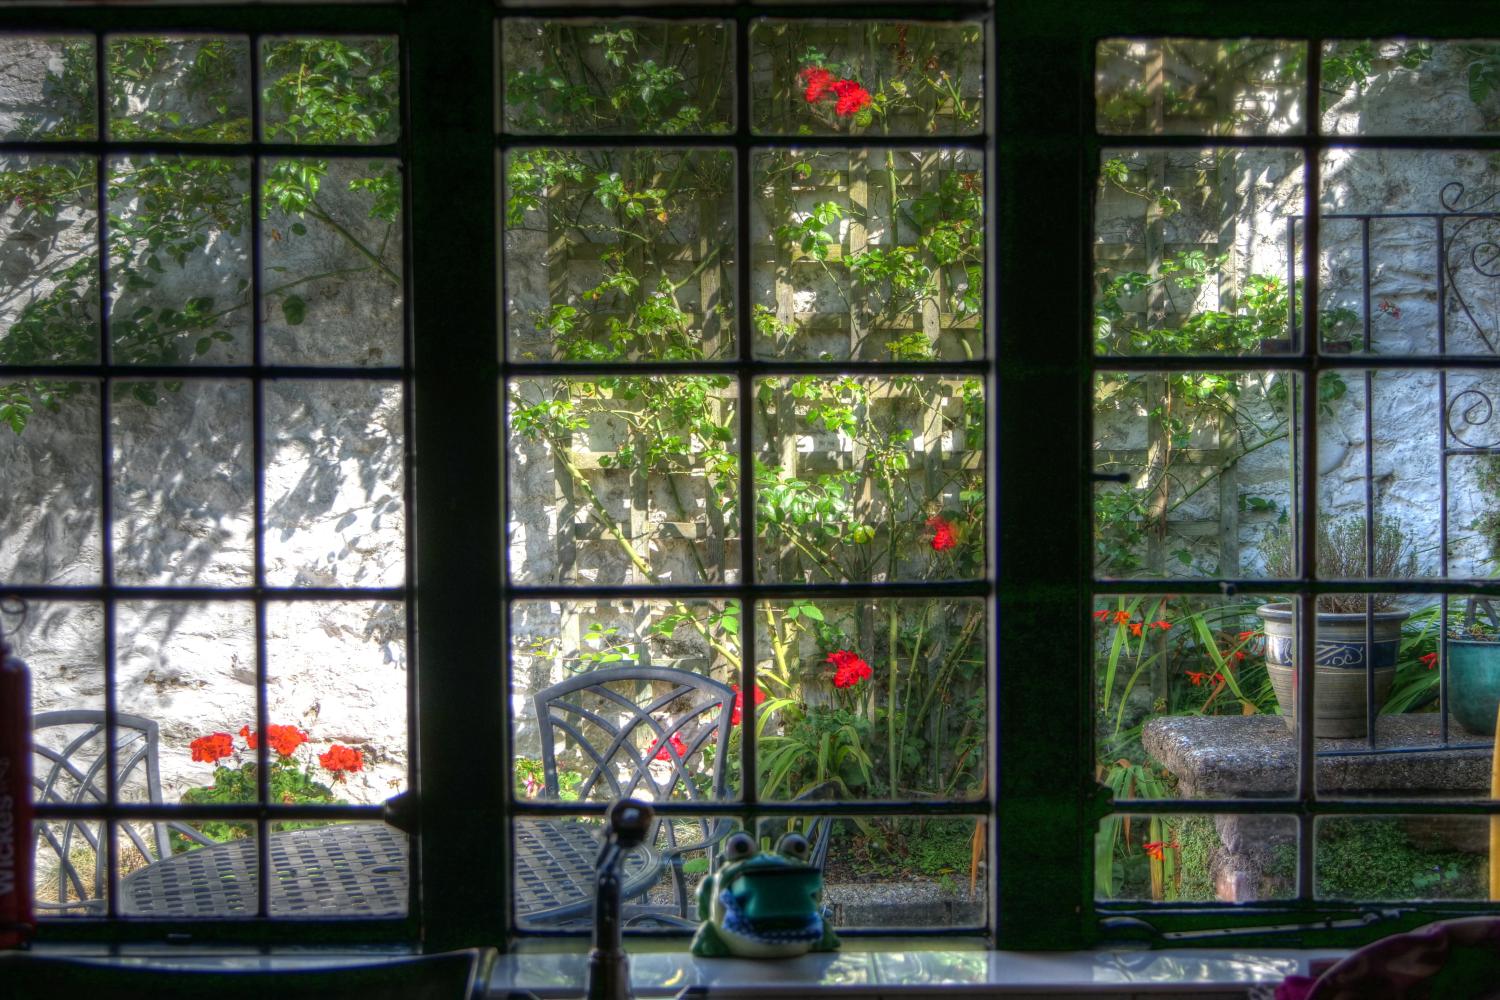 The view from the kitchen through Victorian windows